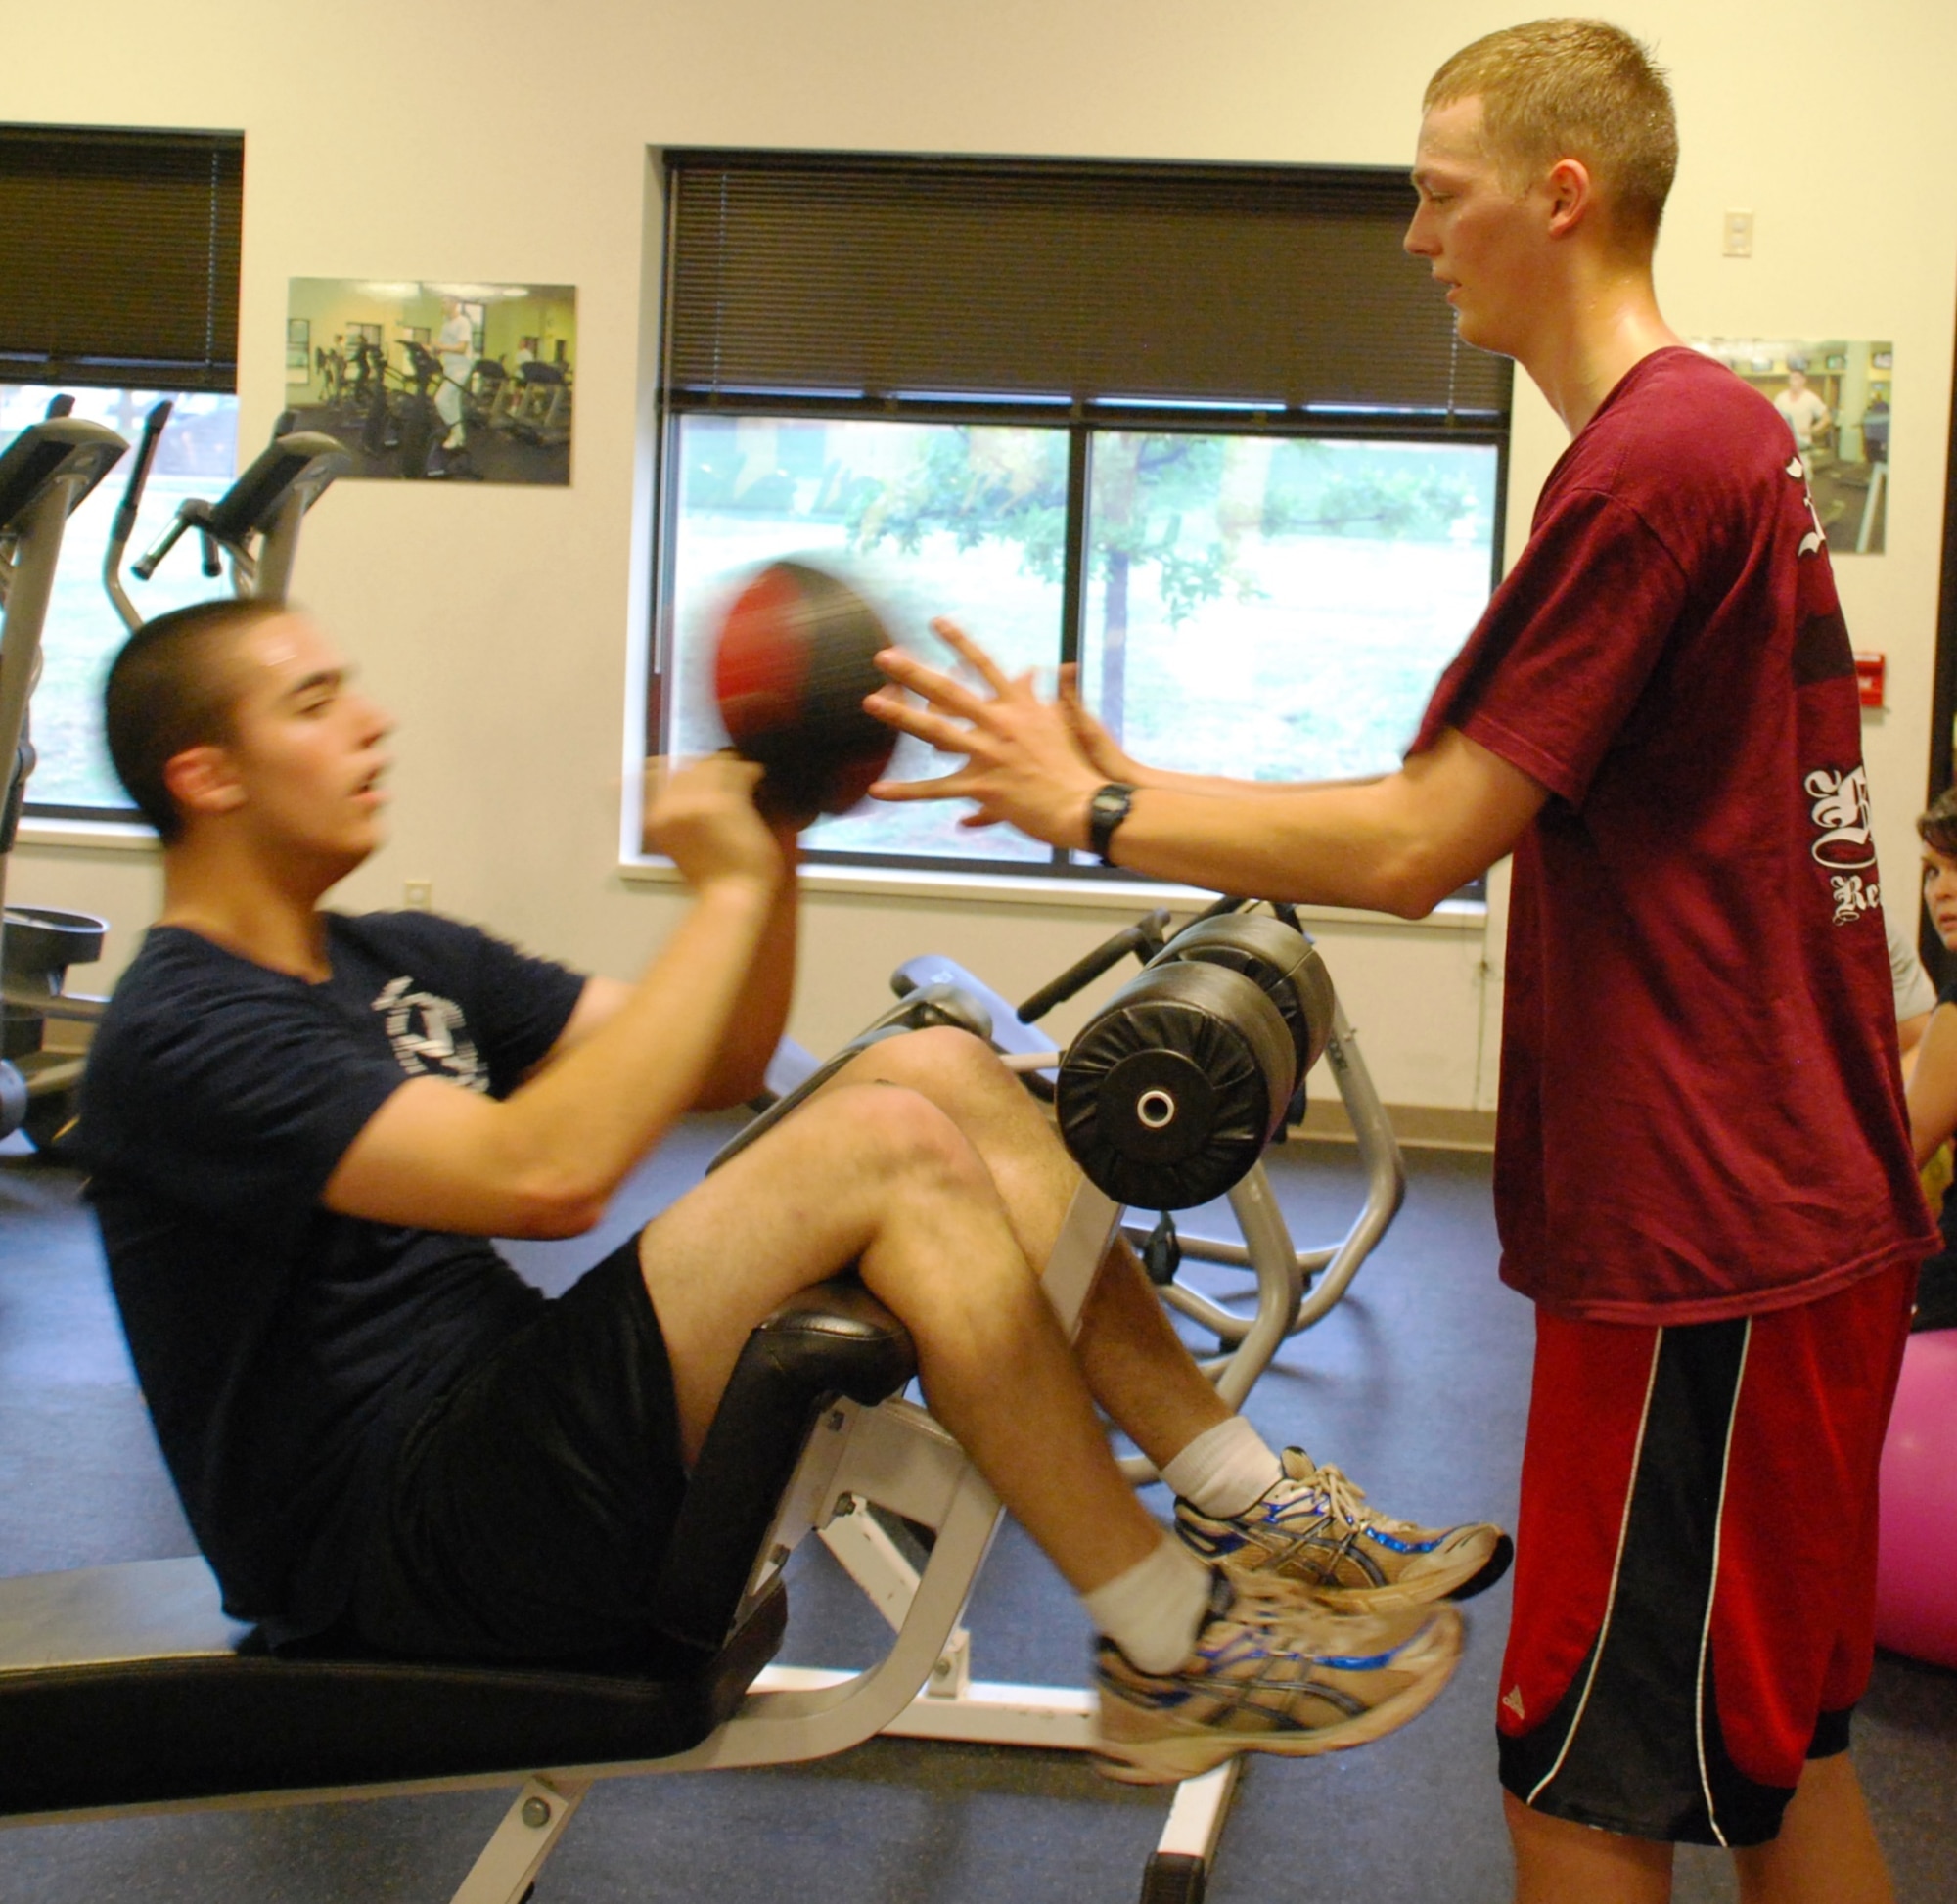 Airmen in Training from the 365th Training Squadron, Airman Josiah Perrin and Airman Ryan Clyde, stay in shape by training with an 8-pound medicine ball at the Pitsenbarger Fitness Center, Sheppard Air Force Base, Texas, May 12, 2010. The Air Force will switch to new physical fitness standards July 1, 2010. (U.S. Air Force photo/Airman 1st Class Valerie Hosea)